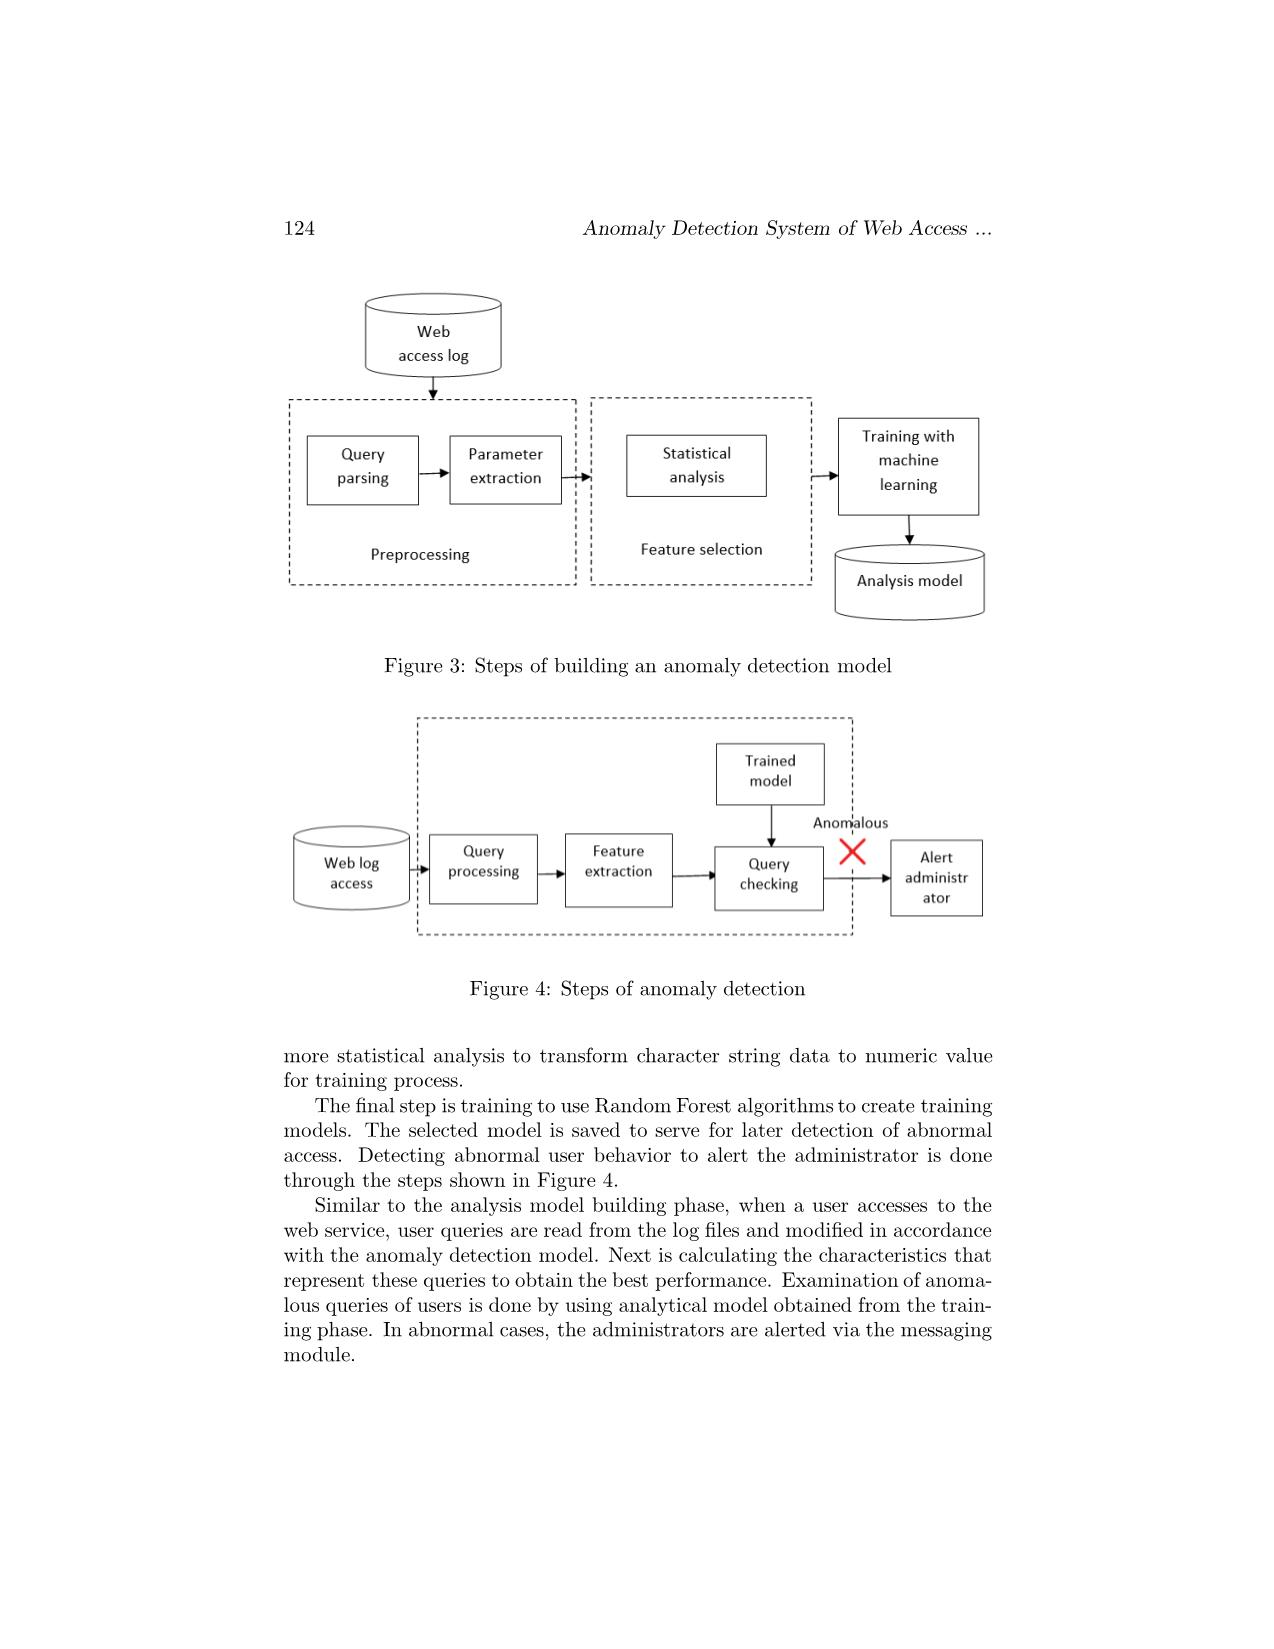 Anomaly detection system of web access using user behavior features trang 10